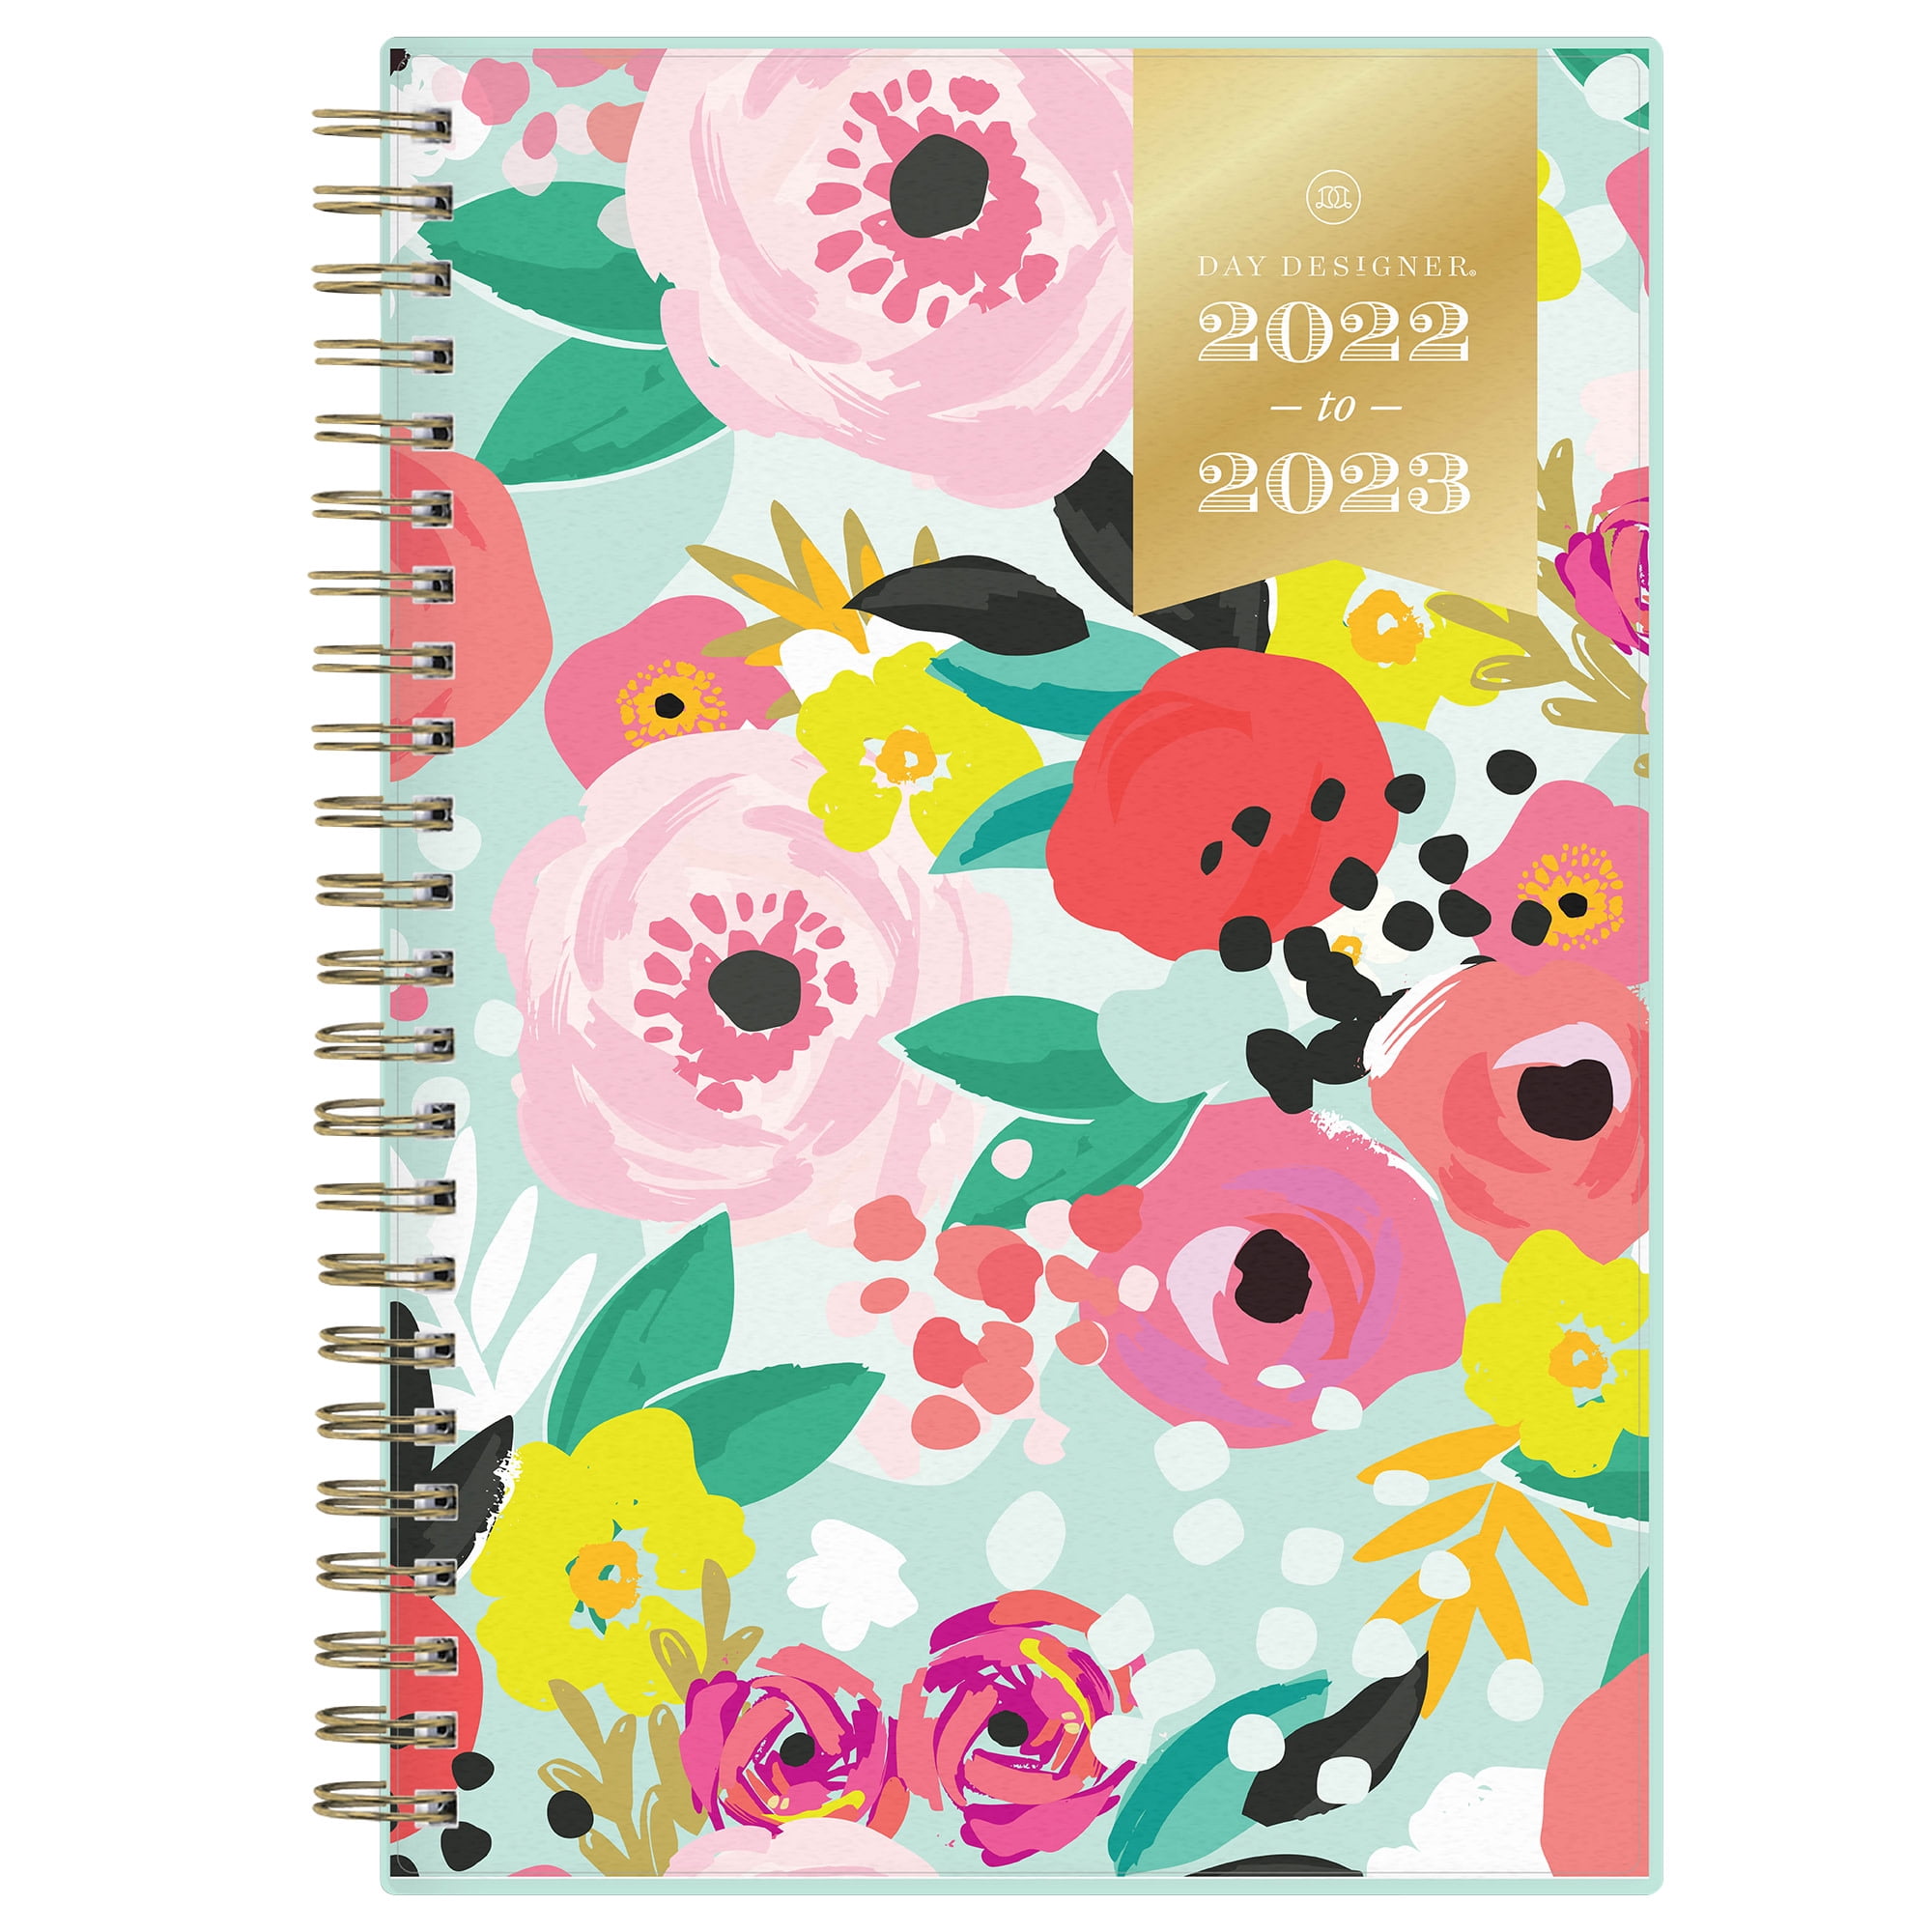 Day Designer for Blue Sky 2022-2023 Academic Year Weekly and Monthly Planner Wirebound Frosted Cover 8.5 x 11 Secret Garden Mint 137896-A23 